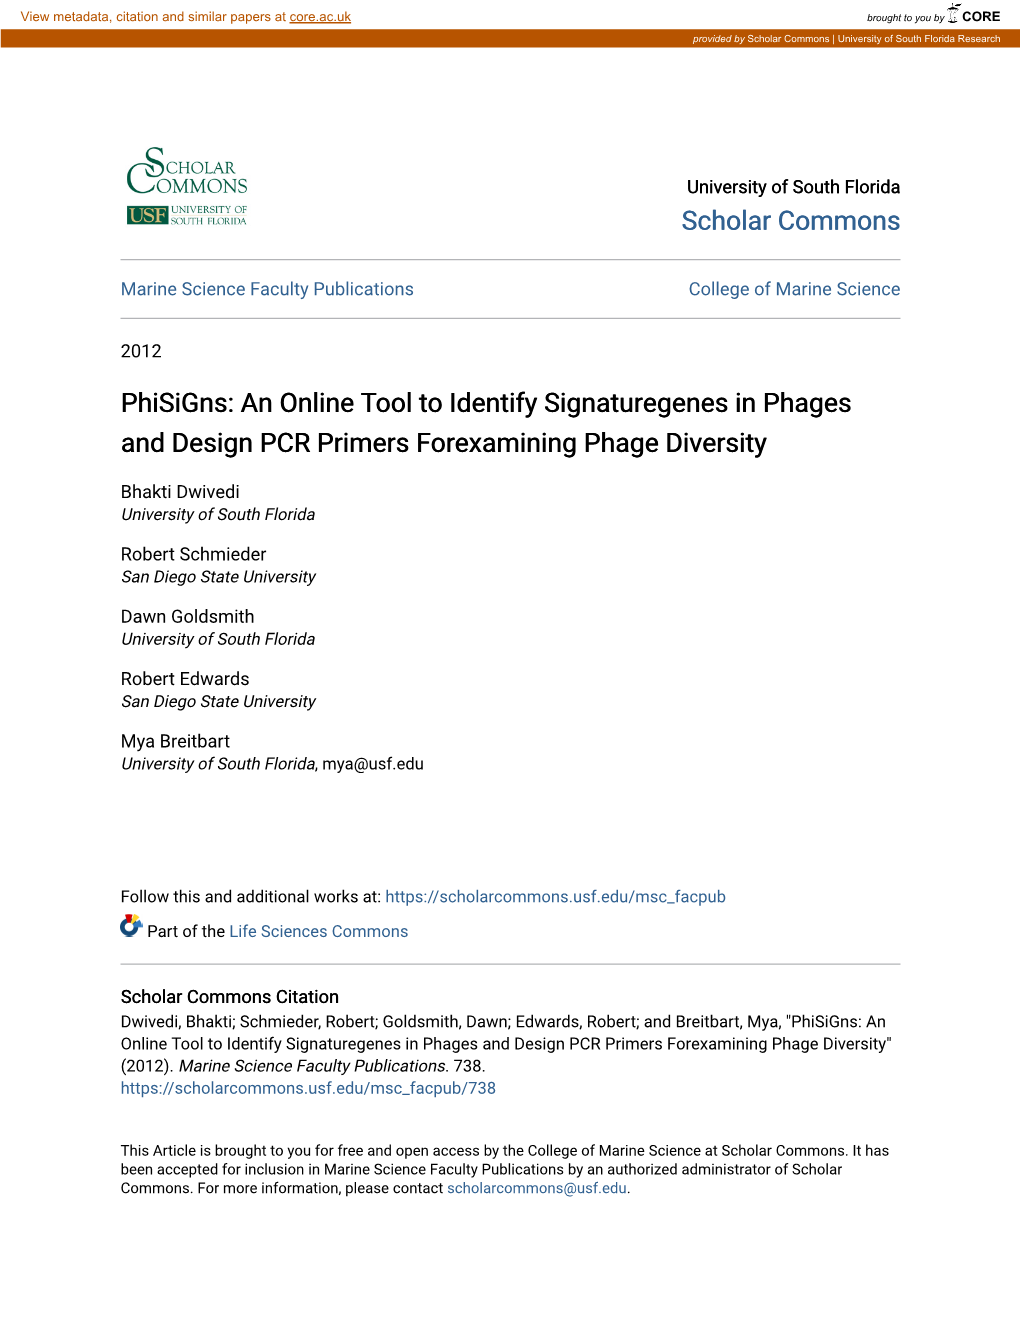 Phisigns: an Online Tool to Identify Signaturegenes in Phages and Design PCR Primers Forexamining Phage Diversity